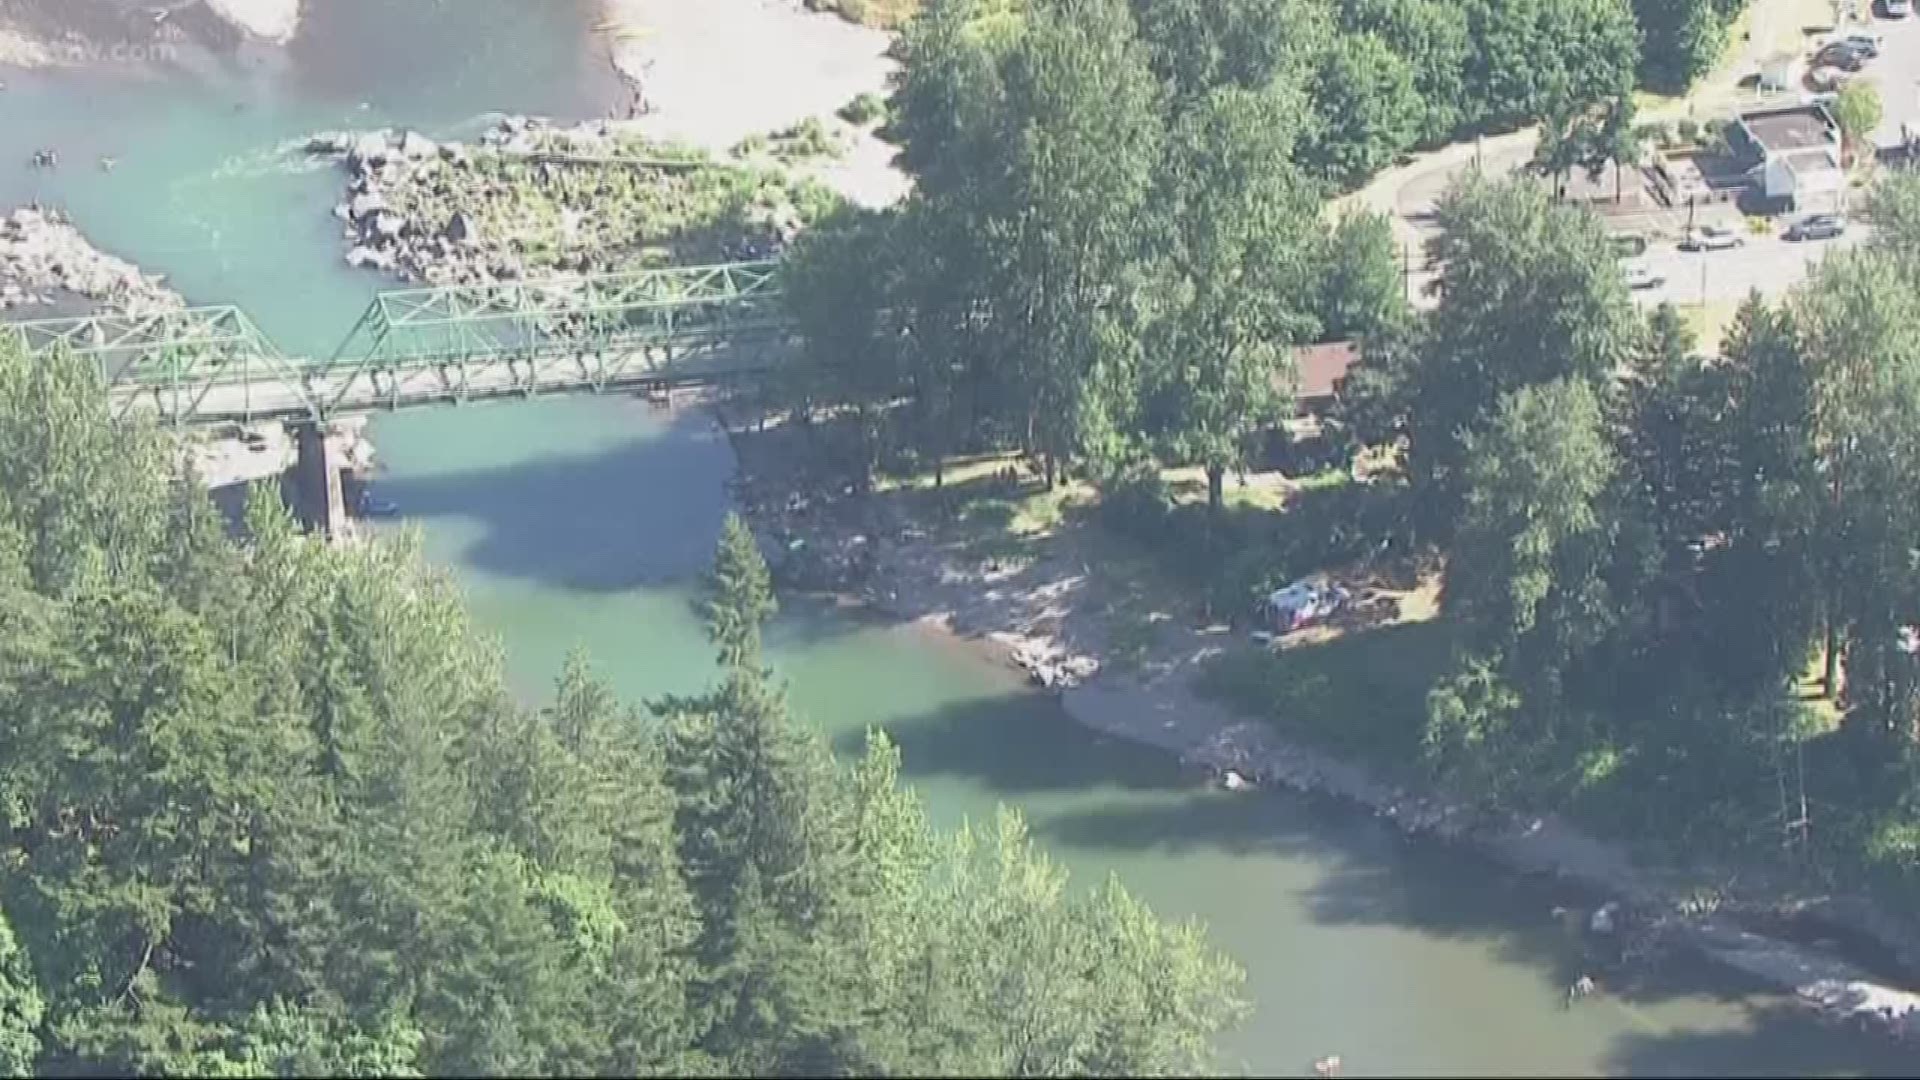 Rescuers pulled a person from the river at Glenn Otto Park